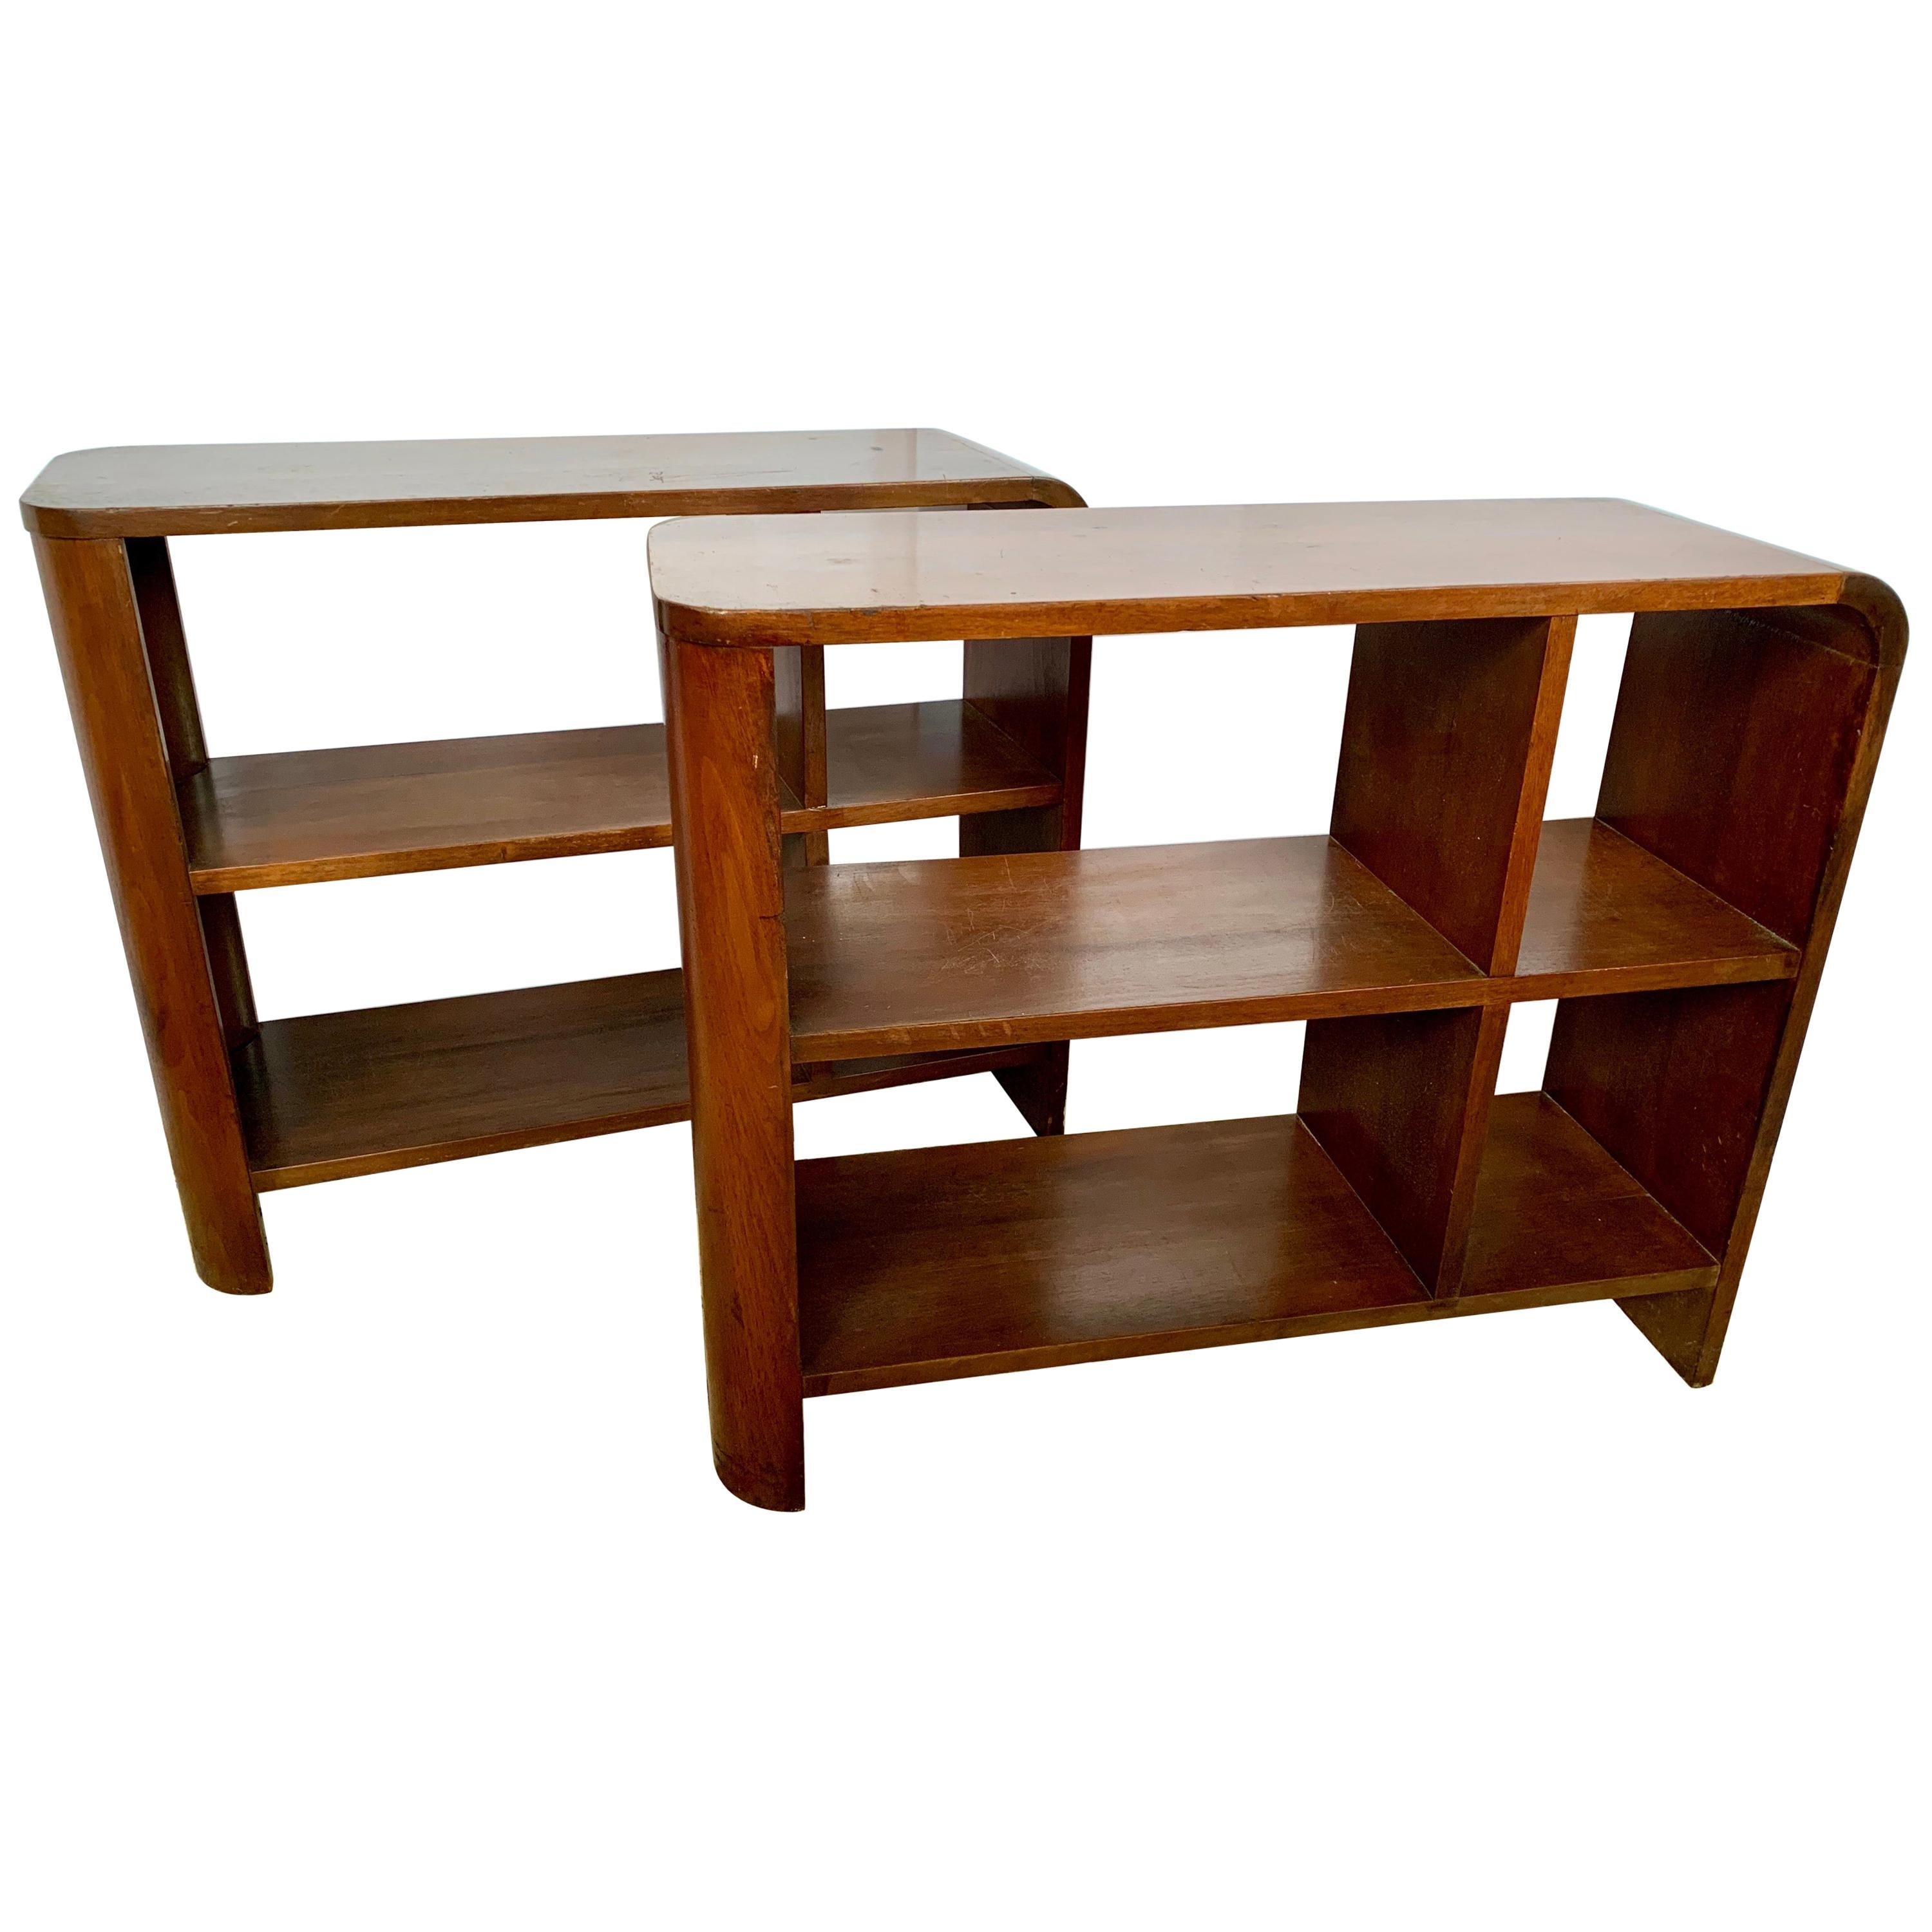 Pair of Mid-Century Modern Walnut Bookshelves Nightstands End Tables Bookcases